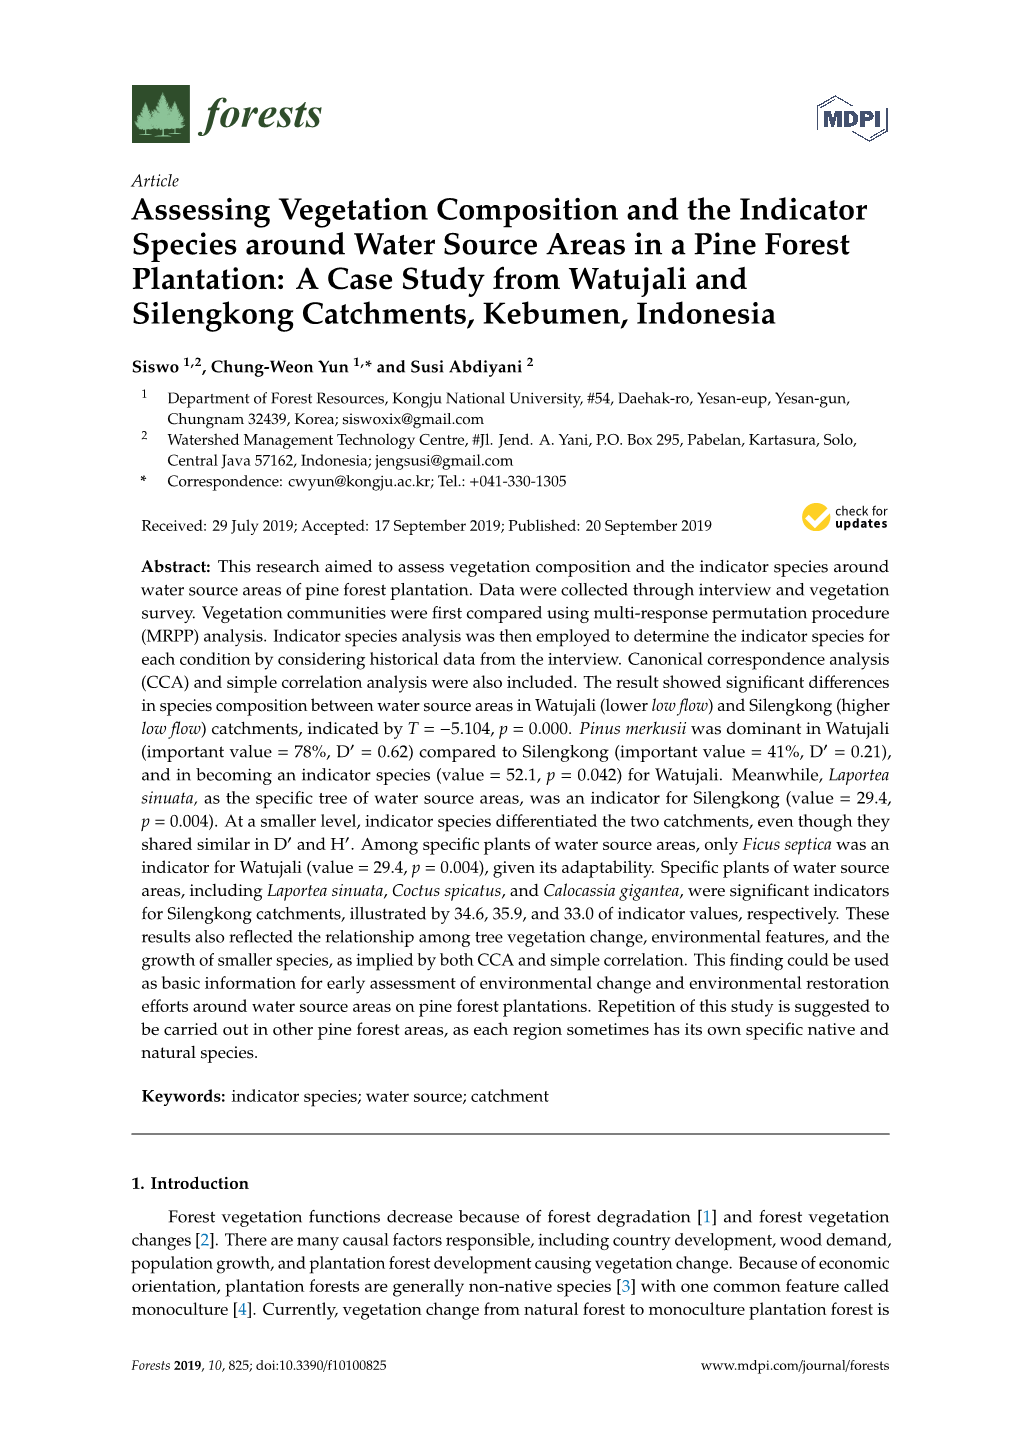 Assessing Vegetation Composition and the Indicator Species Around Water Source Areas in a Pine Forest Plantation